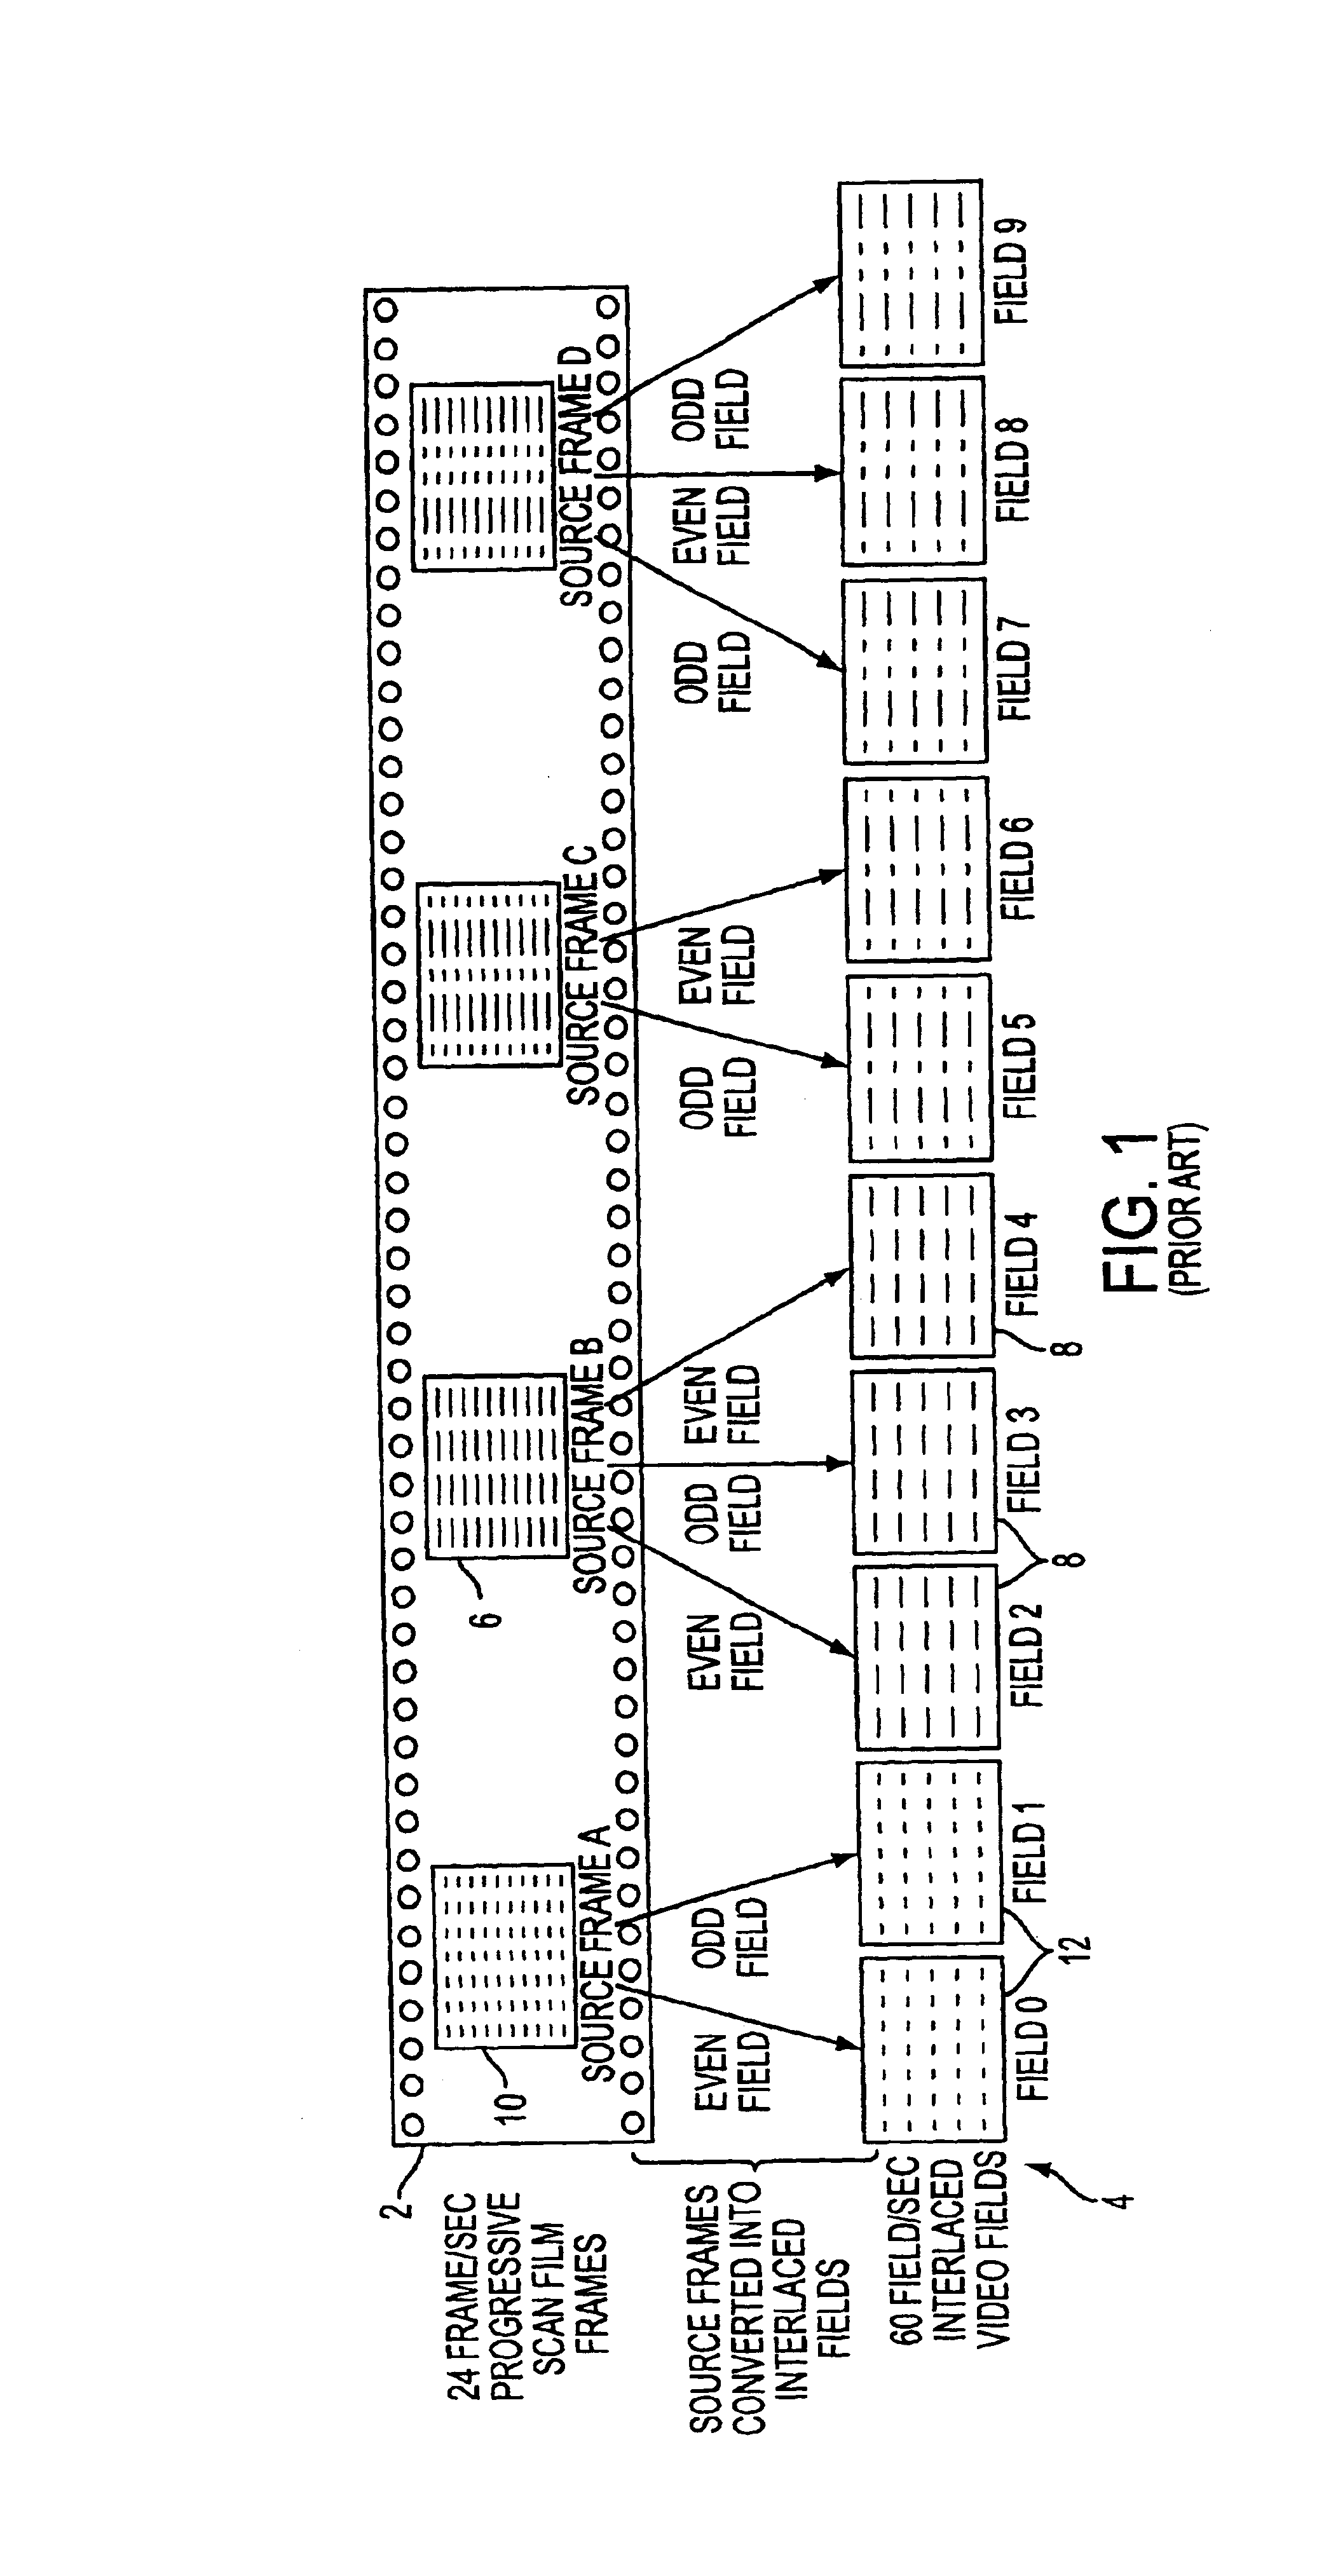 Method, system and article of manufacture for identifying the source type and quality level of a video sequence